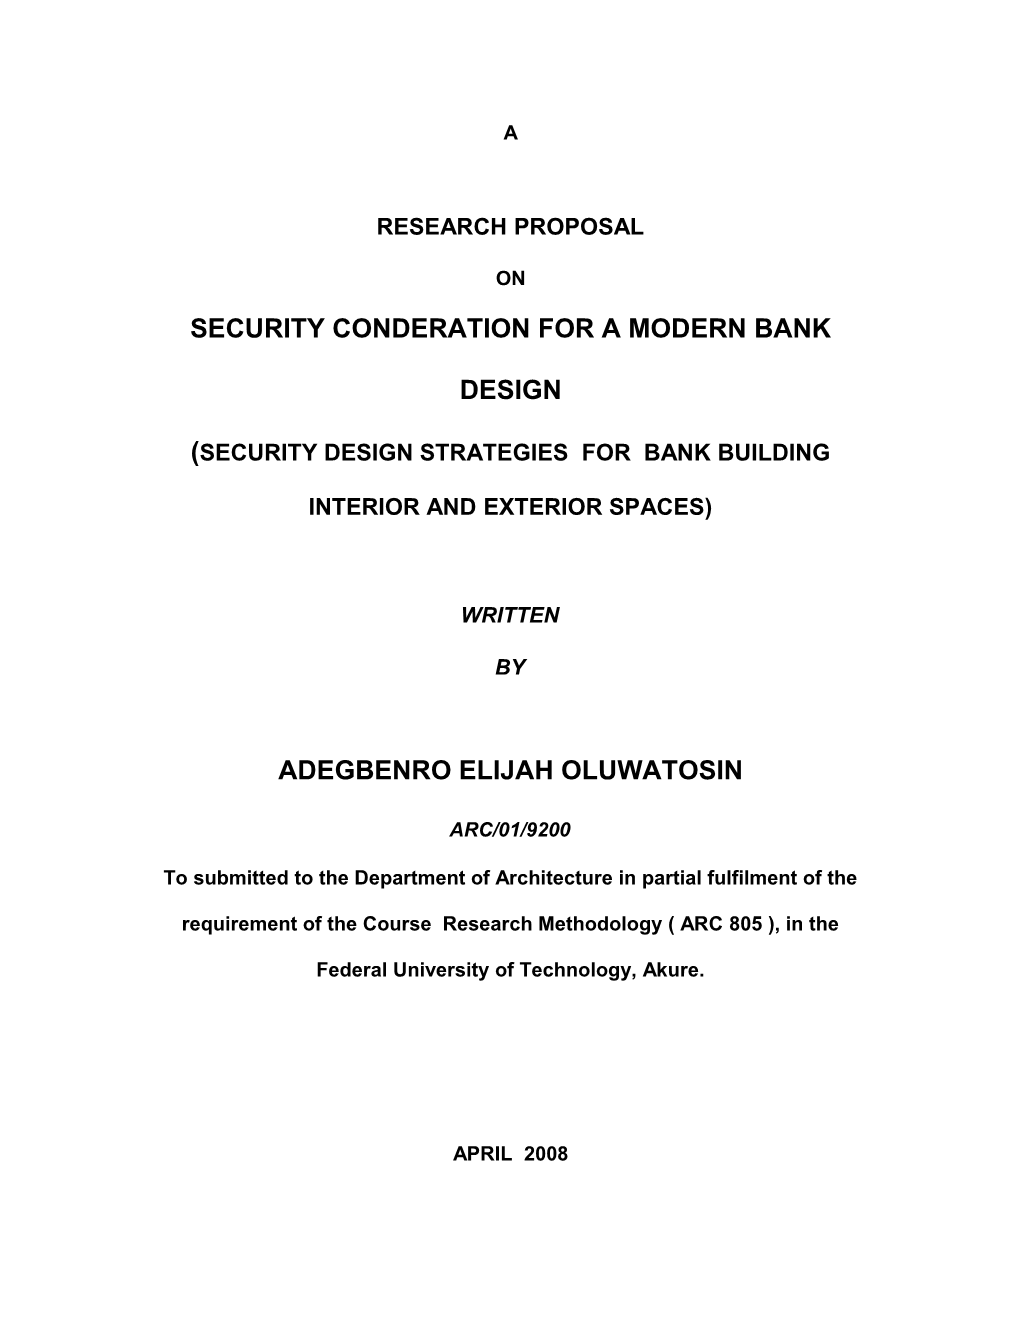 Security Conderation for a Modern Bank Design